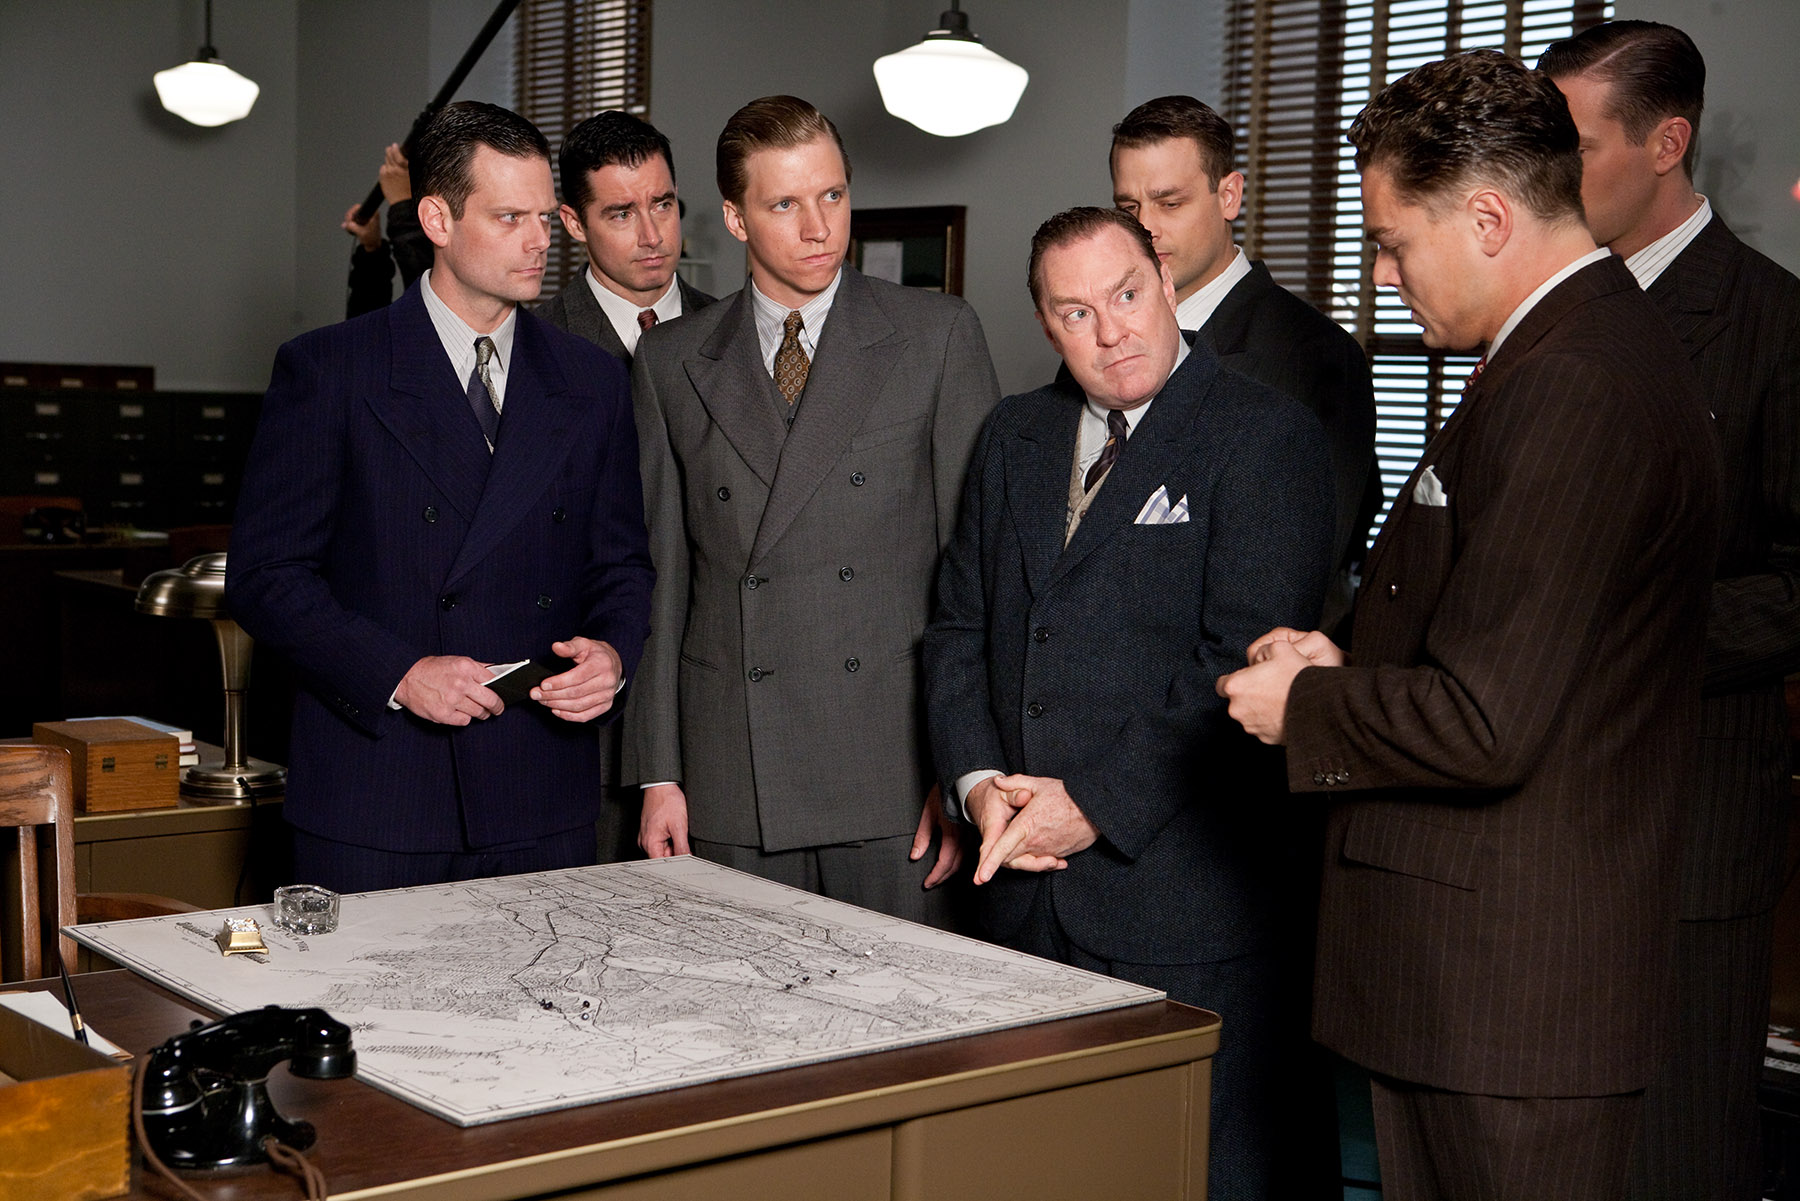 Gregory Hoyt, Stephen Root, Armie Hammer and Leonardo DiCaprio on the set of J. Edgar.